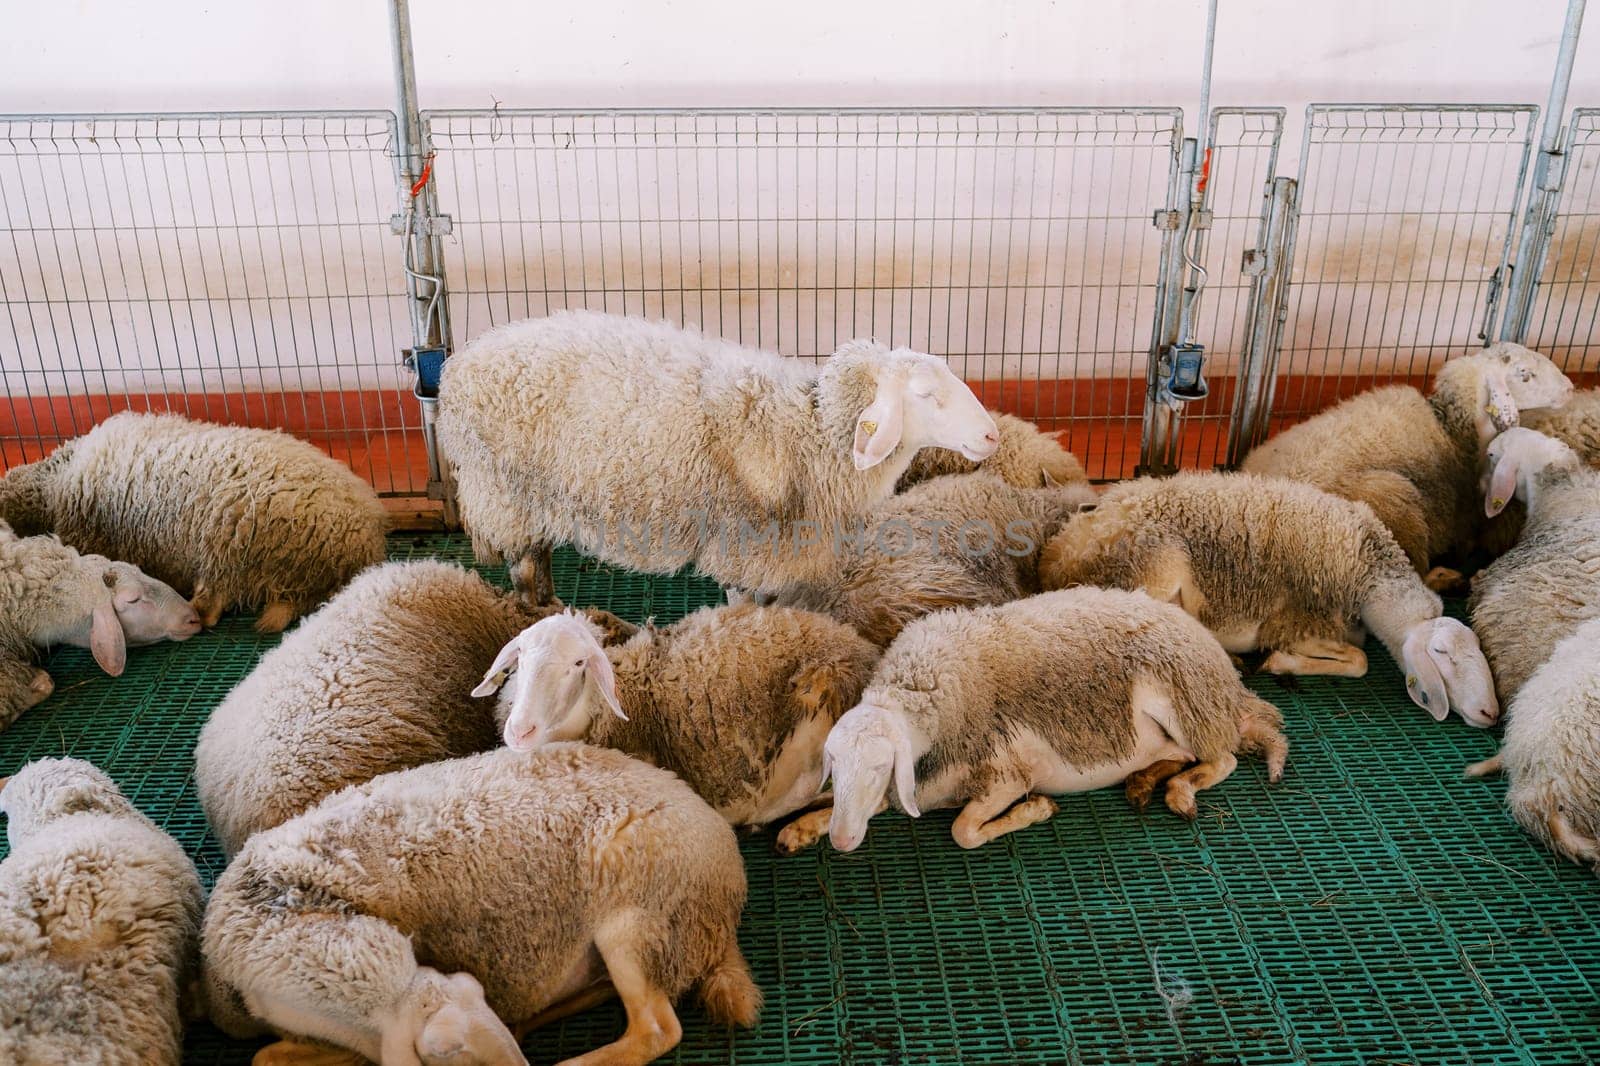 Flock of fluffy white sheep sleeps on a green slatted floor in a paddock on a farm. High quality photo